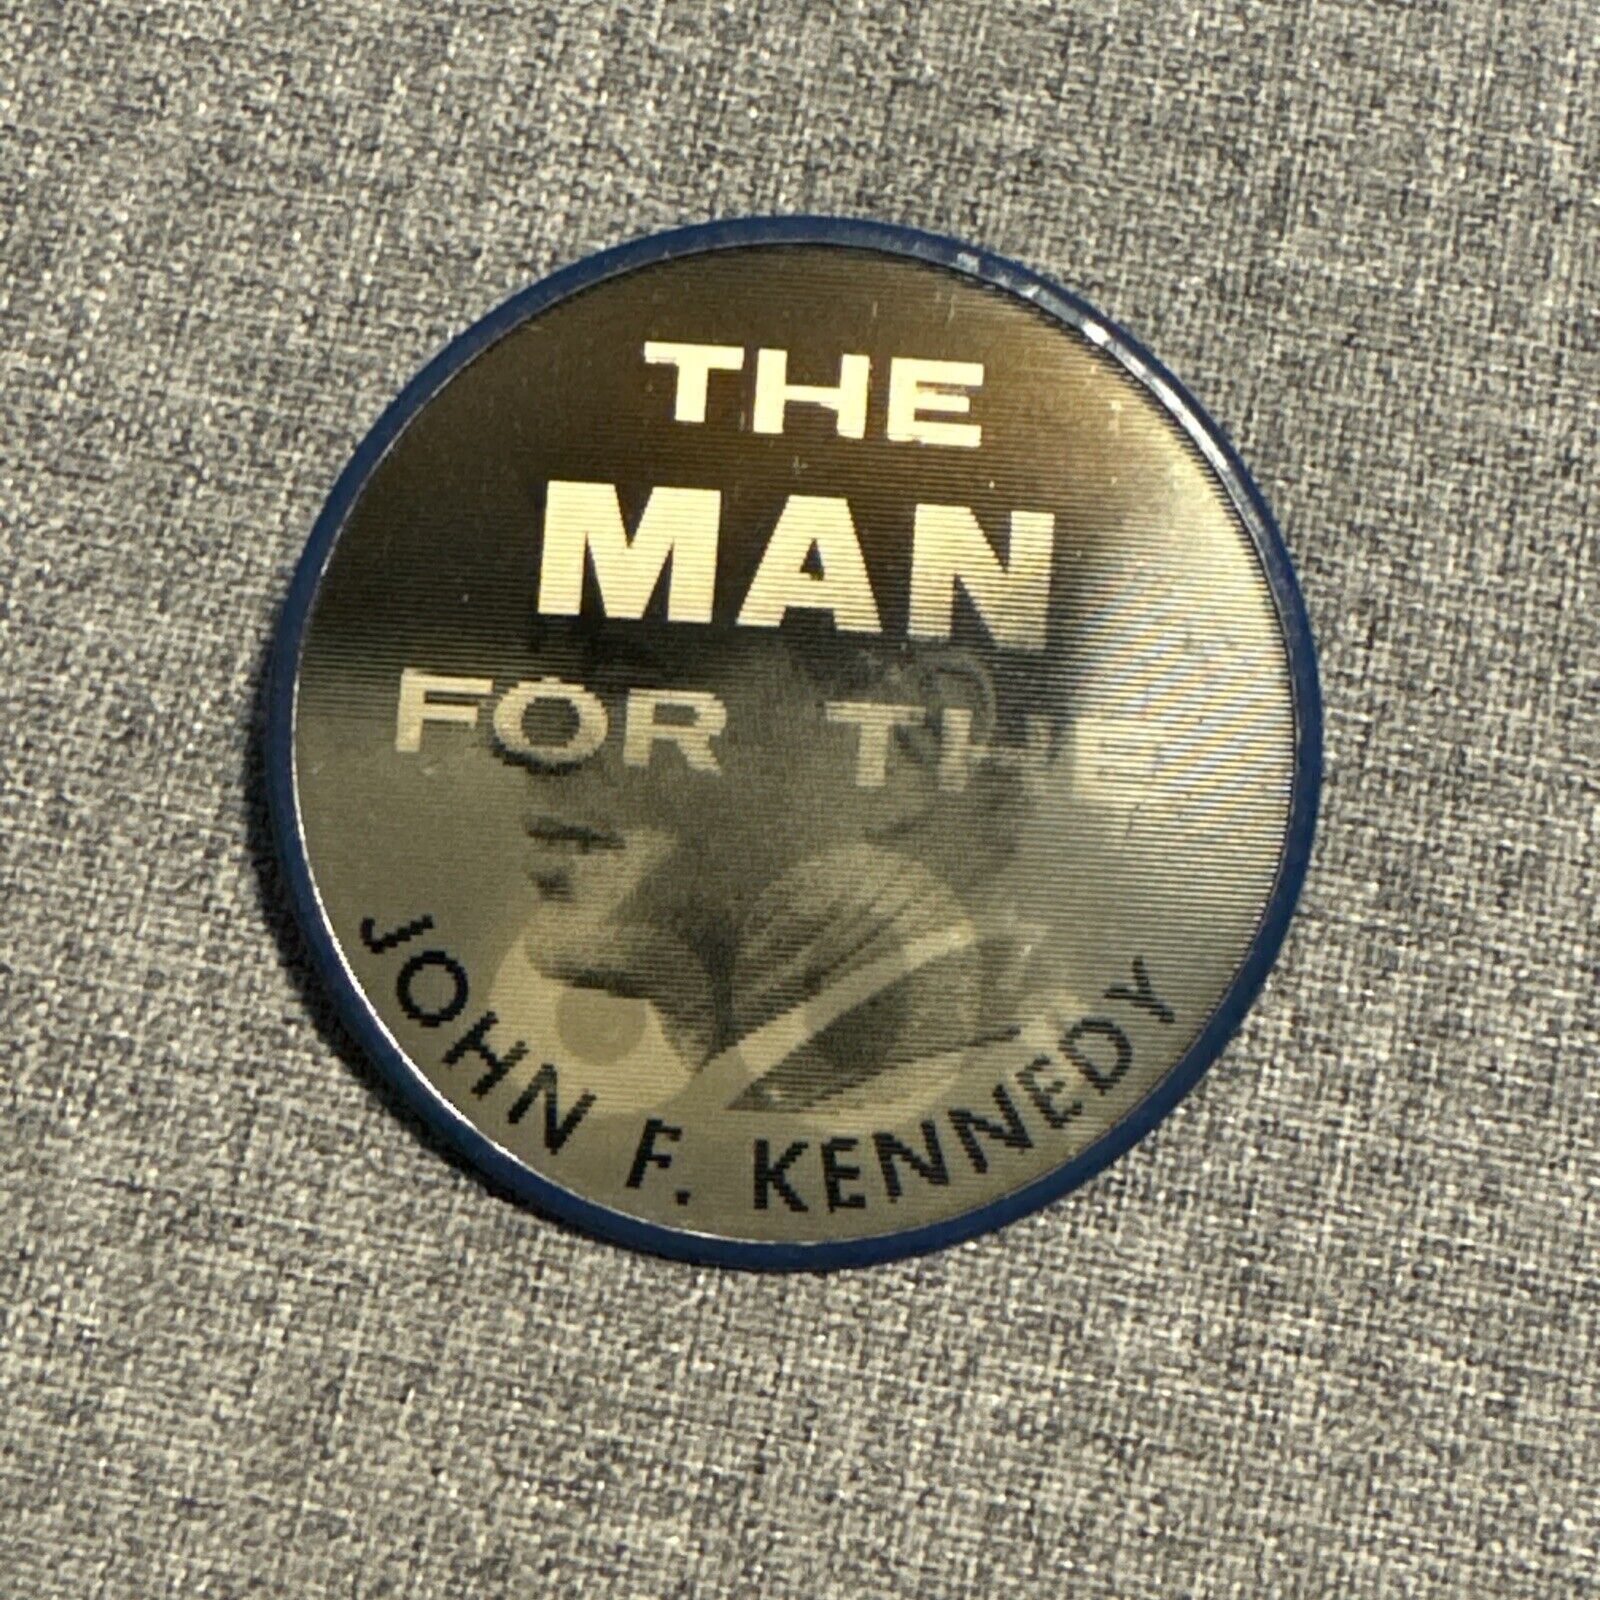 Vintage Pinback Button - KENNEDY THE MAN FOR THE 60\'S 1960 Vari-vue Flasher Pin